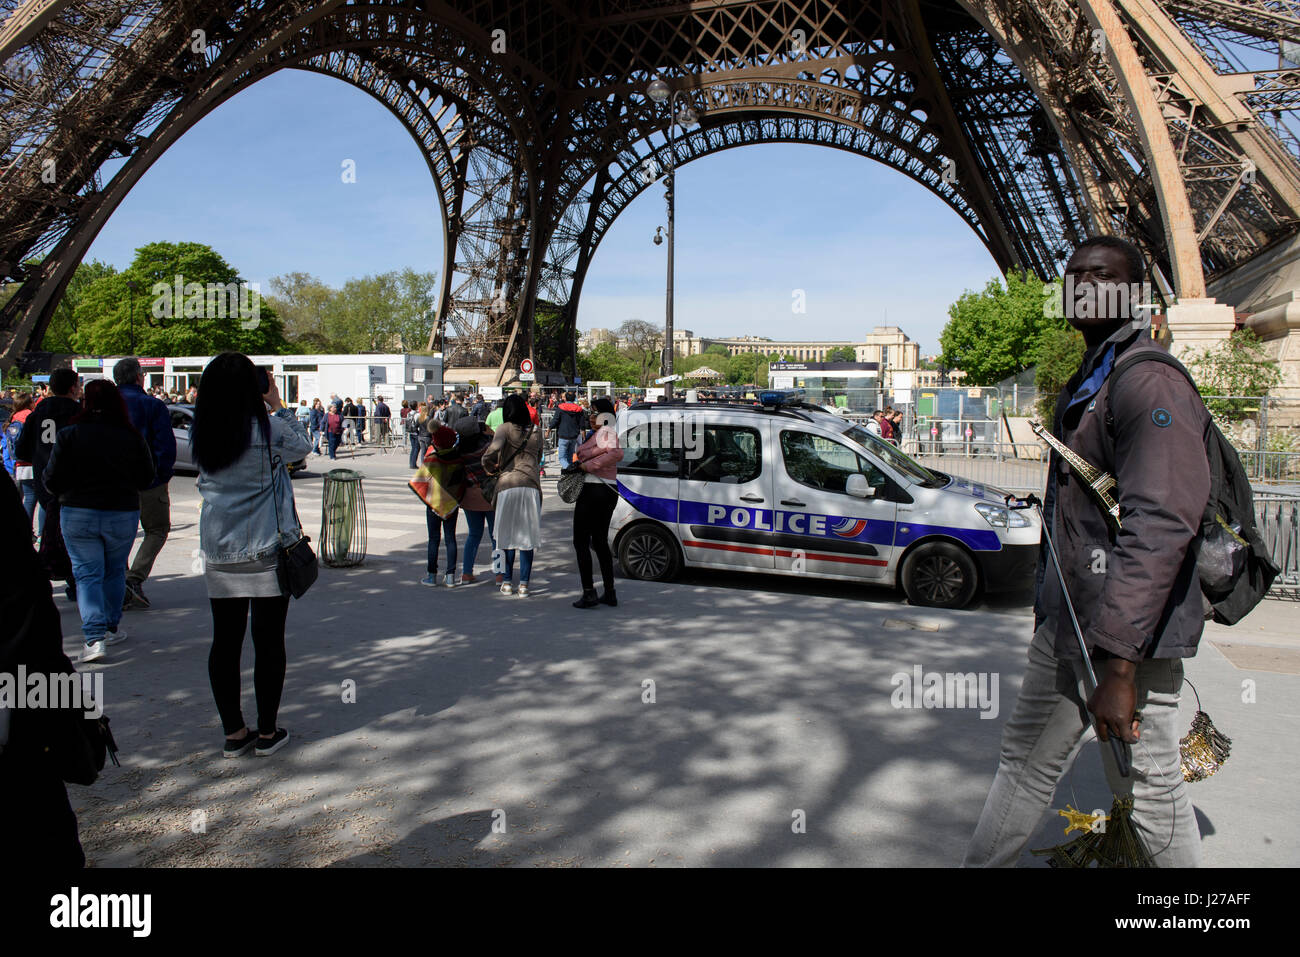 French police car monitoring the area around the Eiffel Tower in Paris, France; Street vendor selling small Eiffel Tower souvenirs Stock Photo